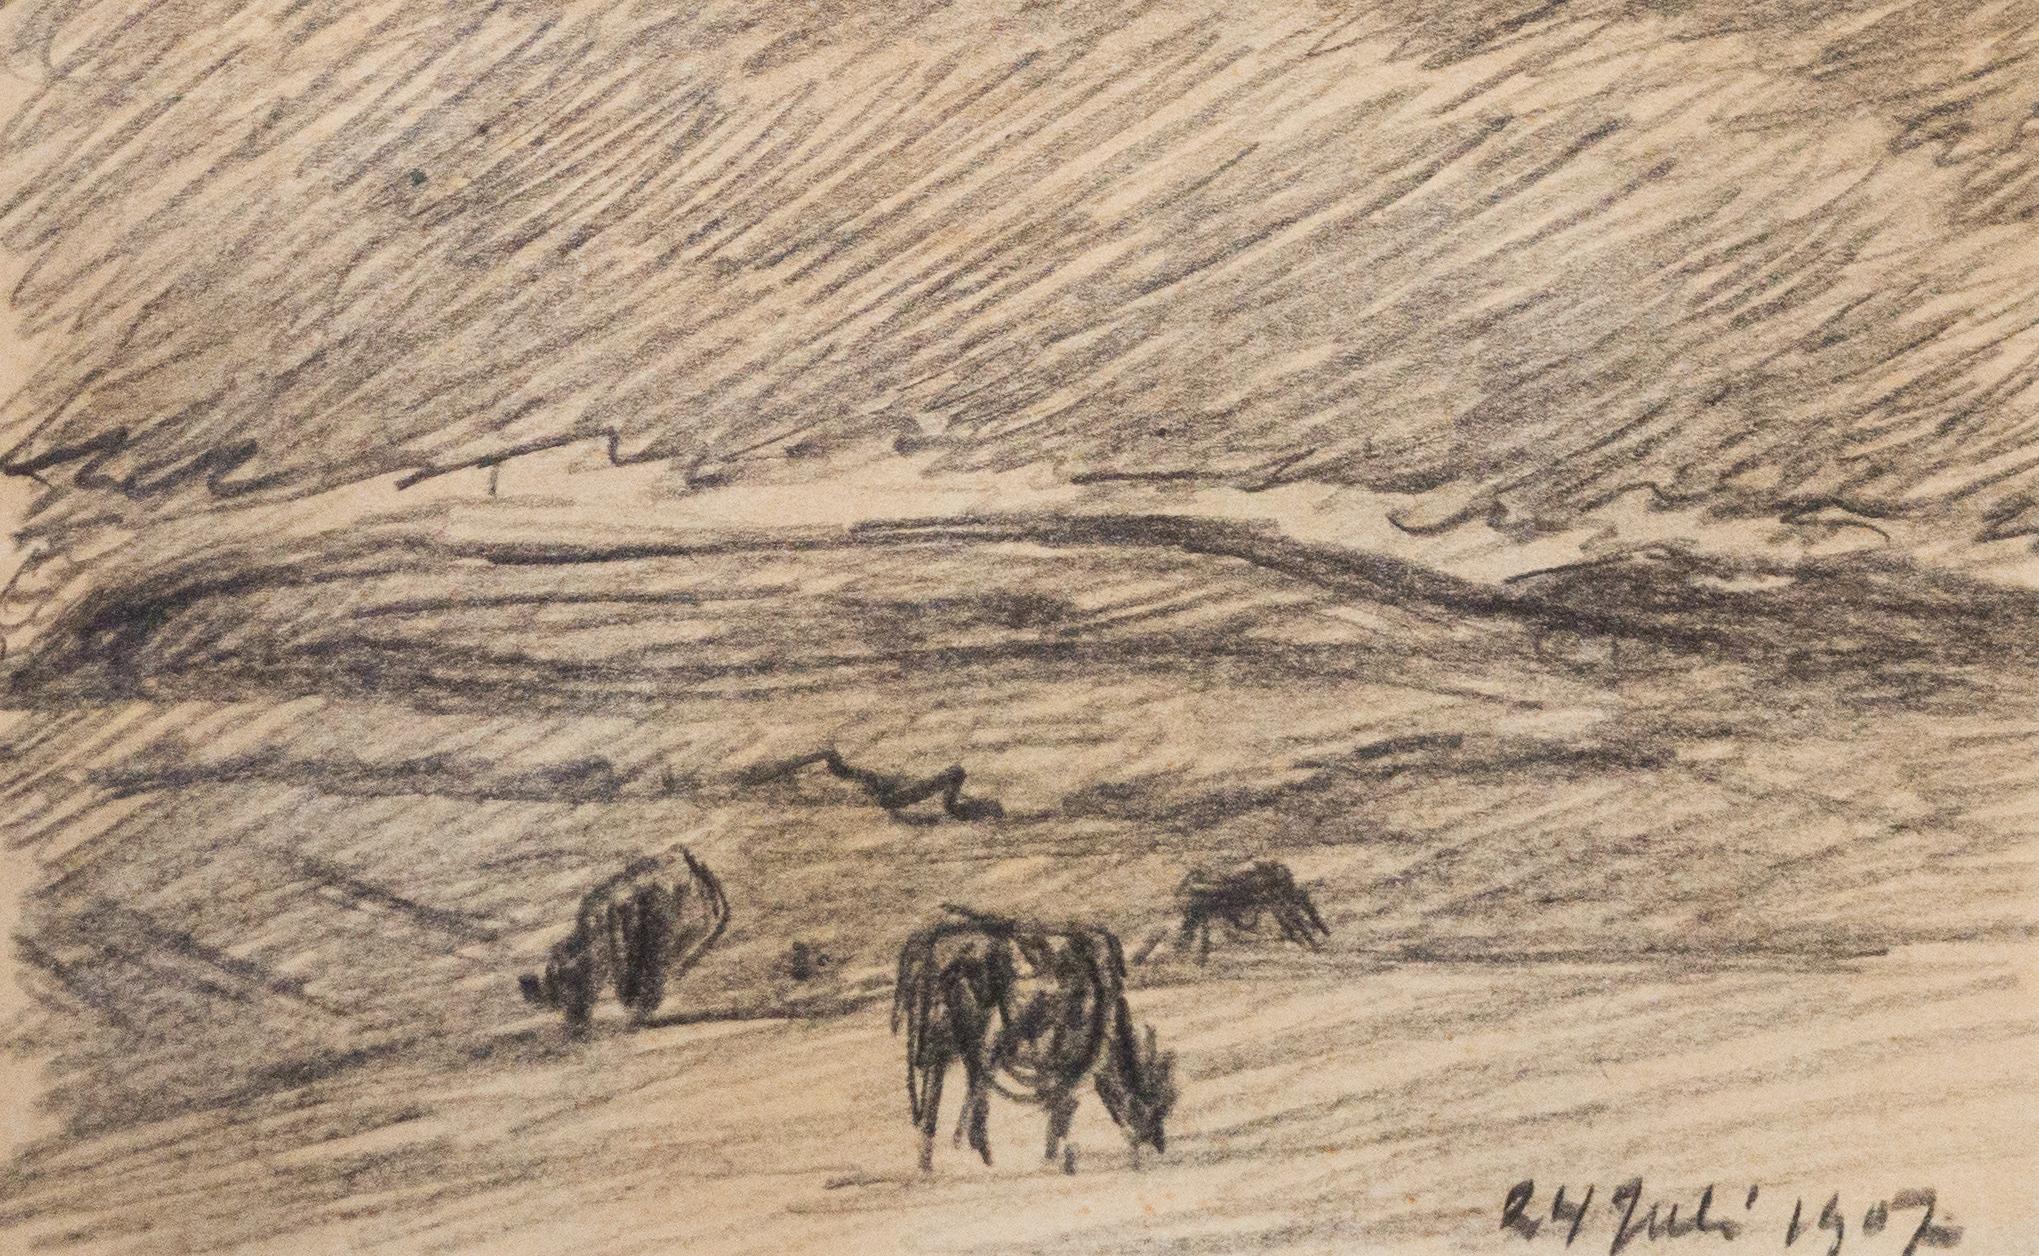 Cows Graze in a Meadow, Pencil, 1907 - Naturalistic Art by Nils Kreuger